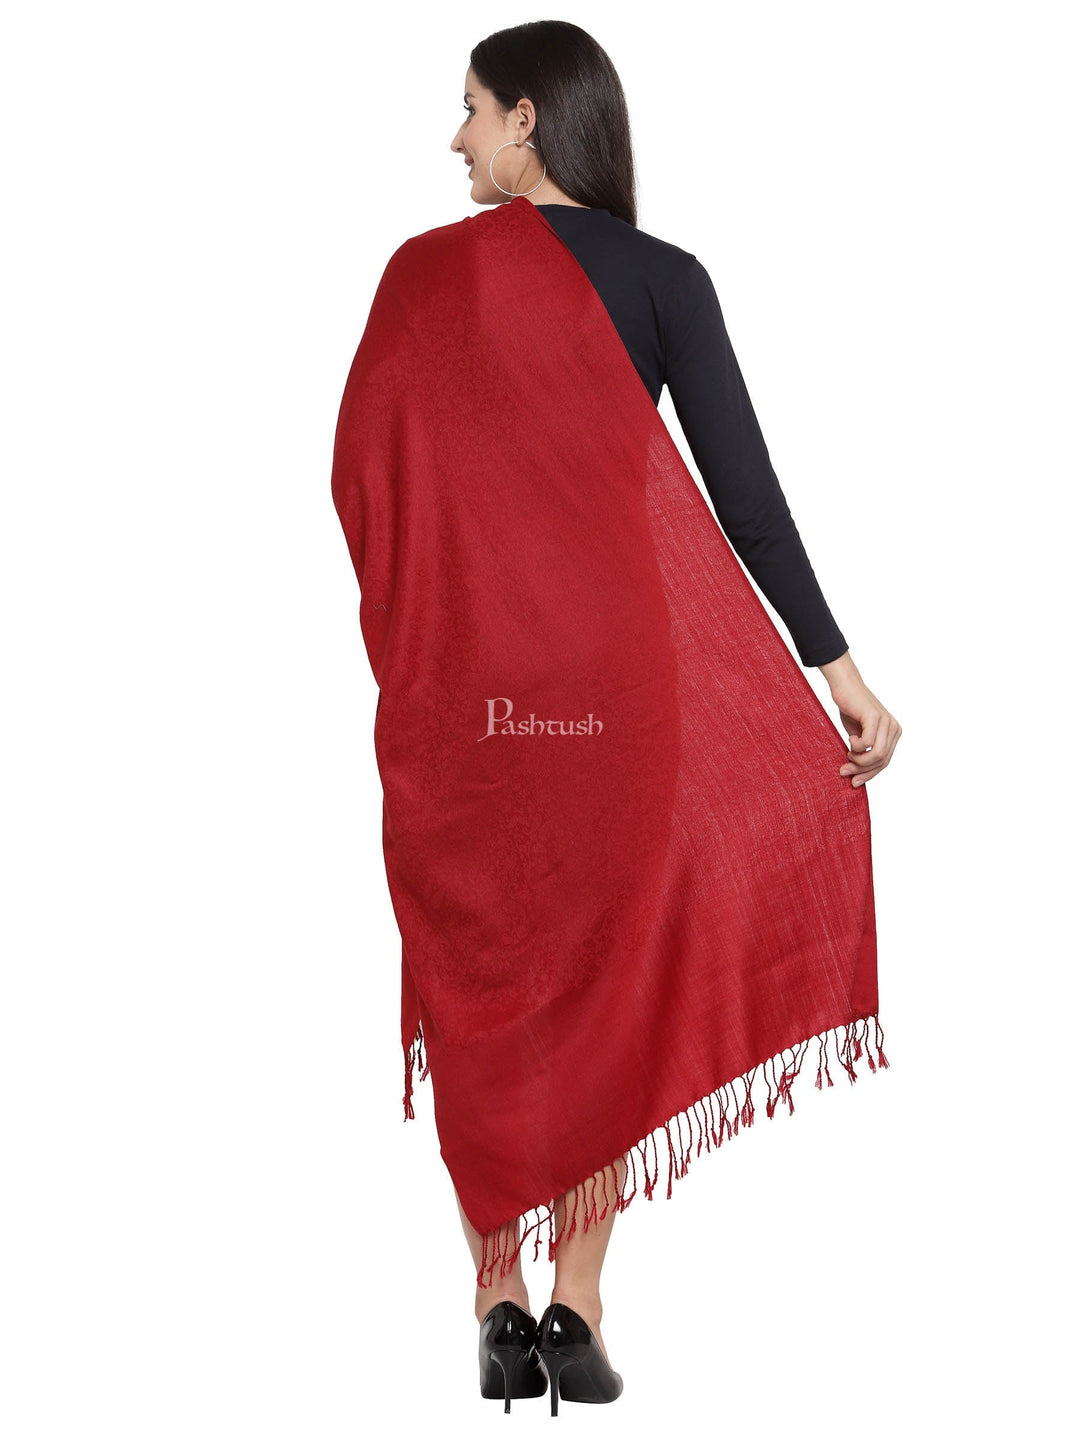 Pashtush India Womens Stoles and Scarves Scarf Pashtush Womens Stole, Fine Wool Scarf, Paisley Jacquard Weave, Maroon